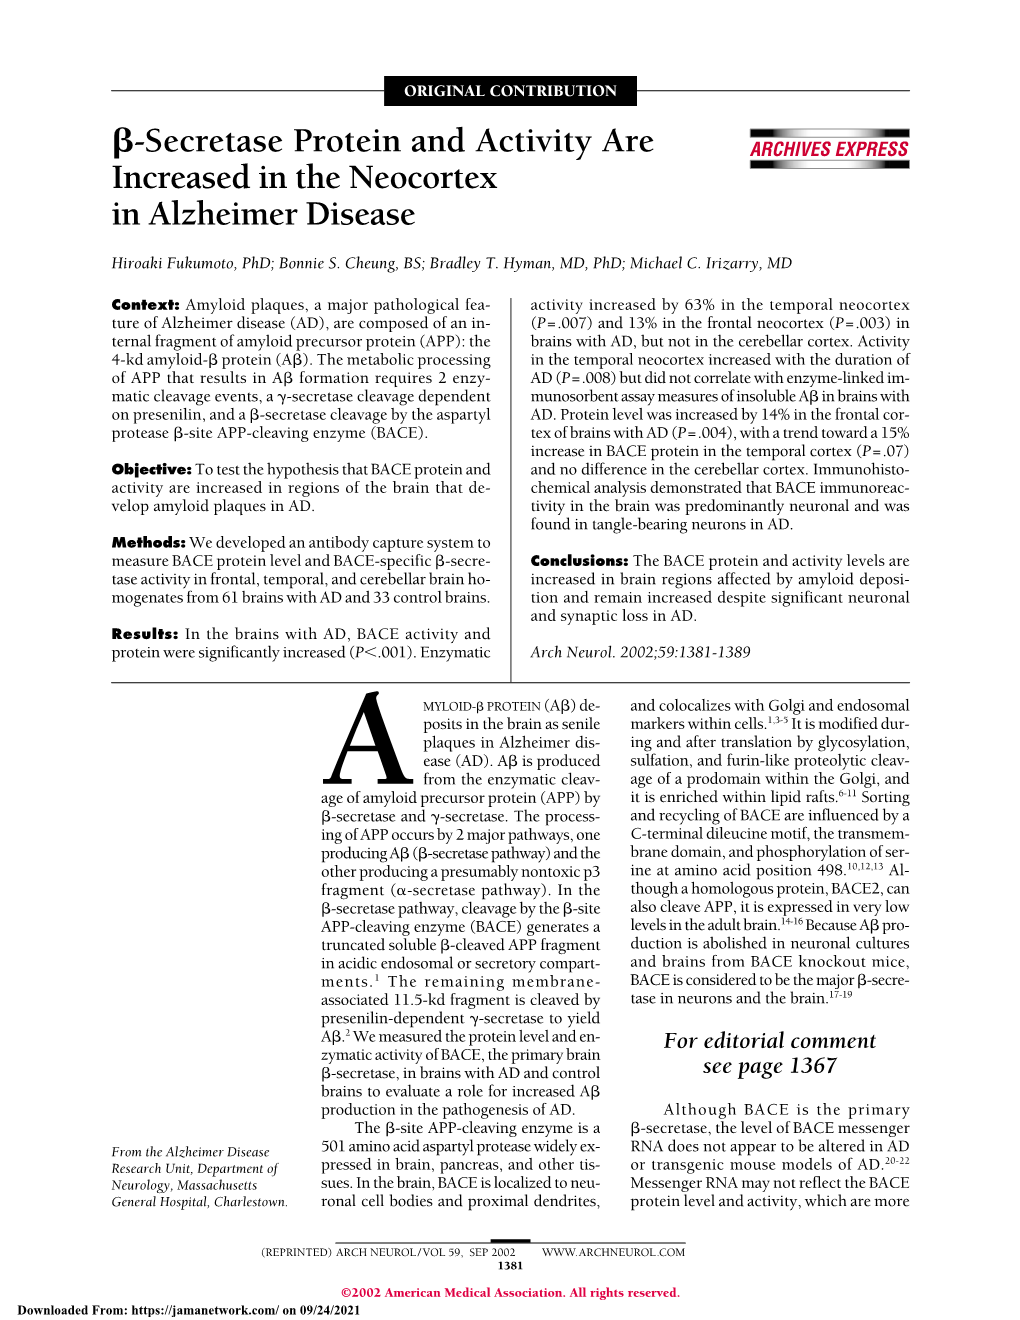 ²-Secretase Protein and Activity Are Increased in the Neocortex In